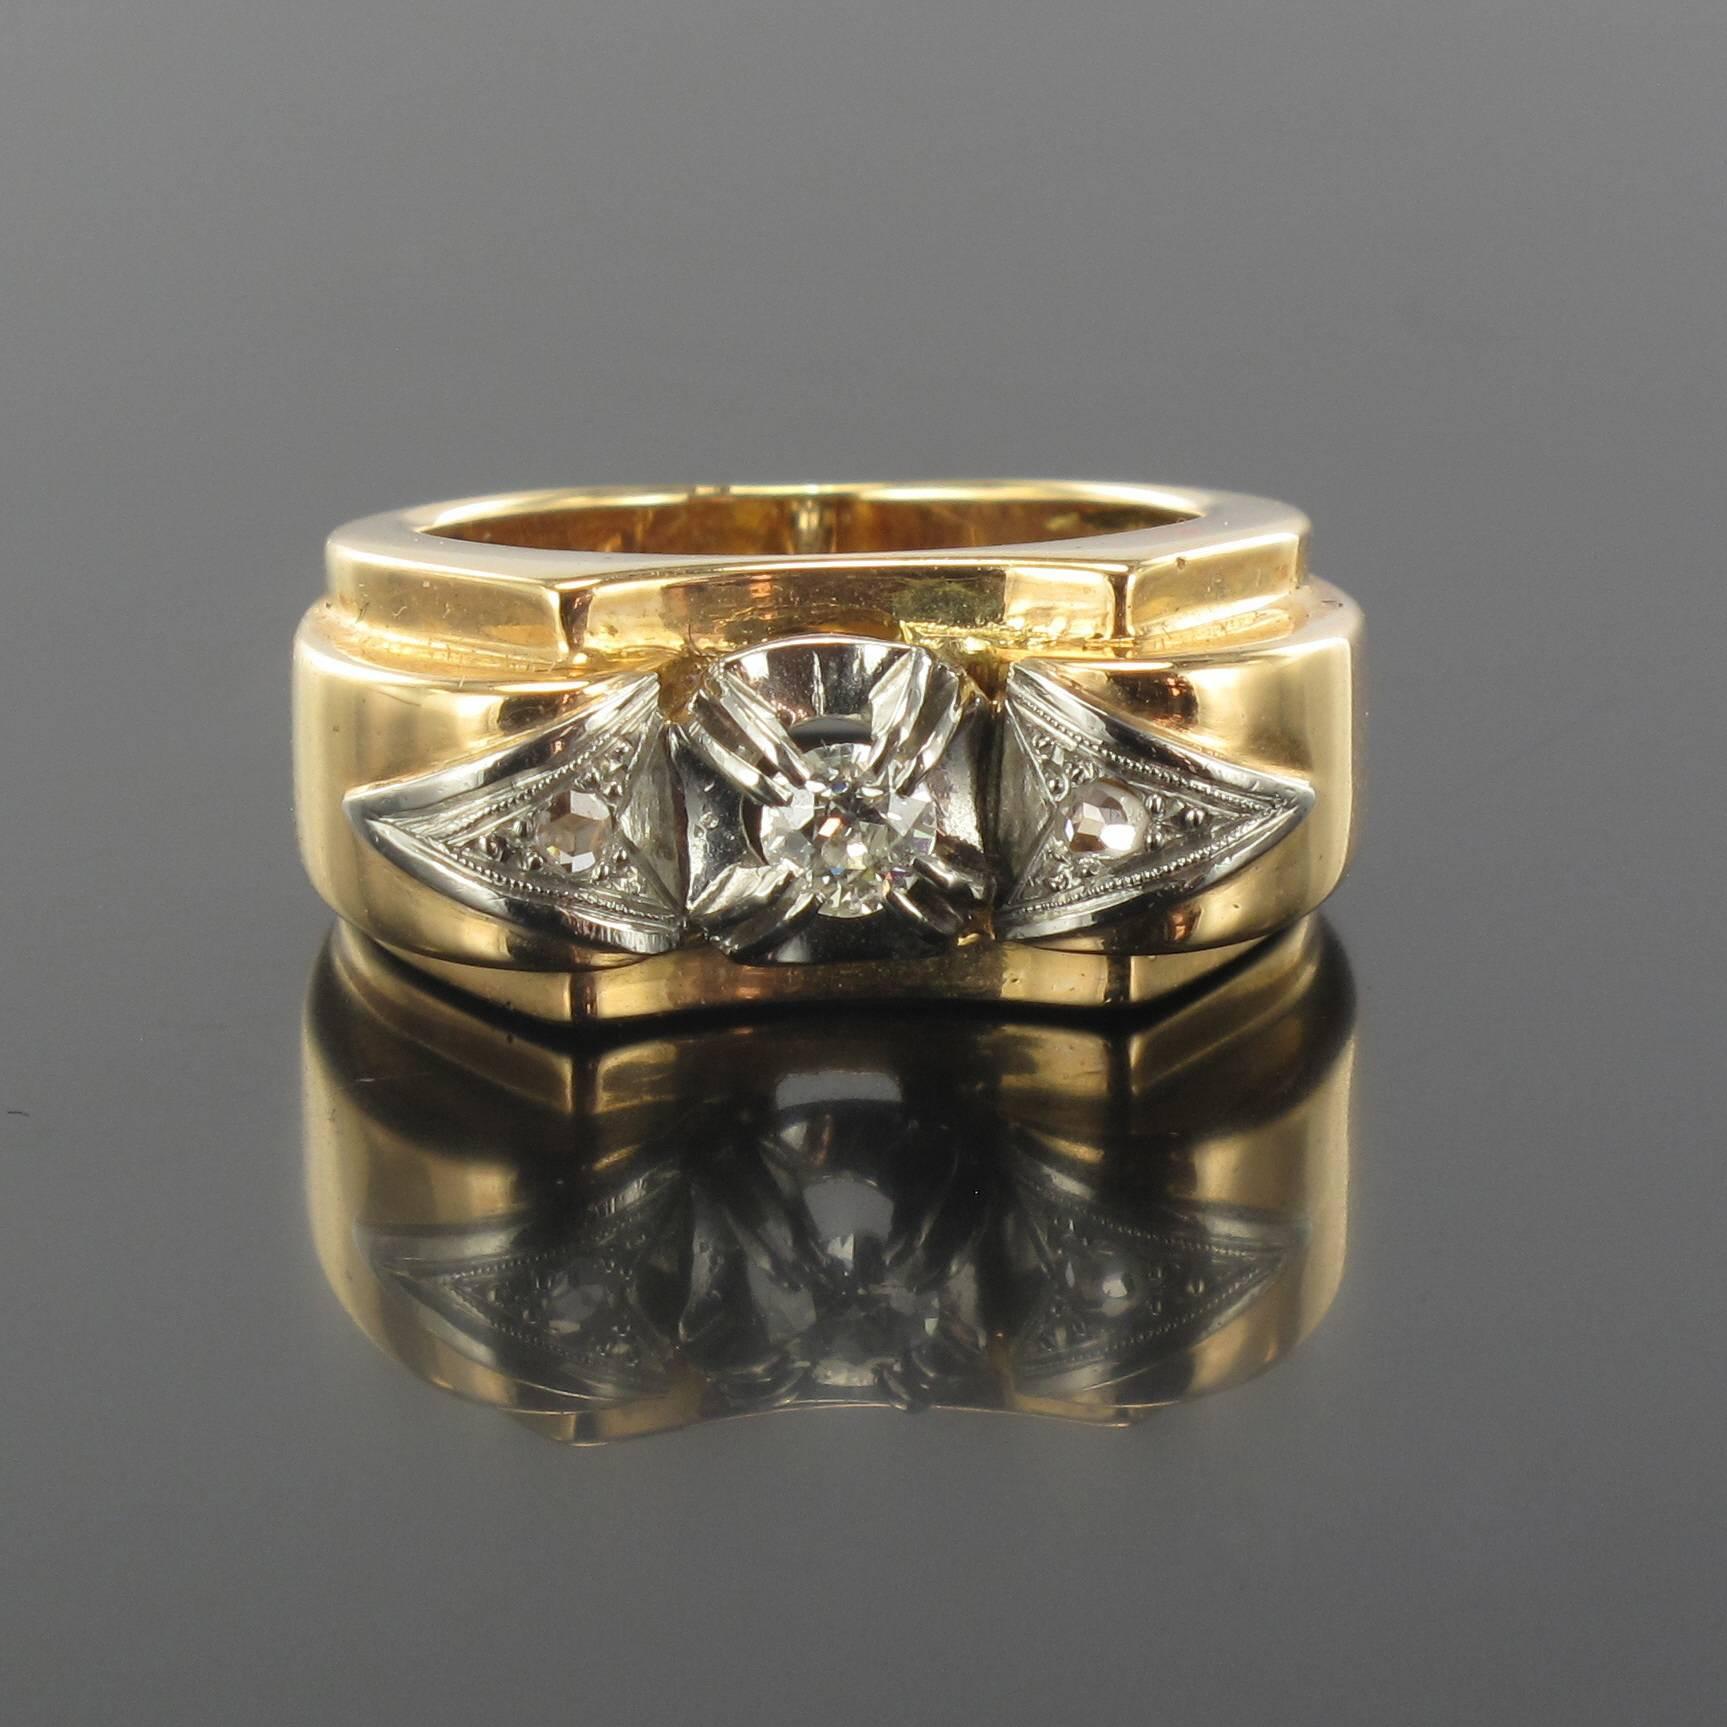 Ring in 18 carat yellow and white golds, eagle head hallmark. 

This splendid diamond tank ring in the form of a bridge features a central claw set brilliant cut diamond. On each side is a triangular design set with a rose cut diamond. 

Width: